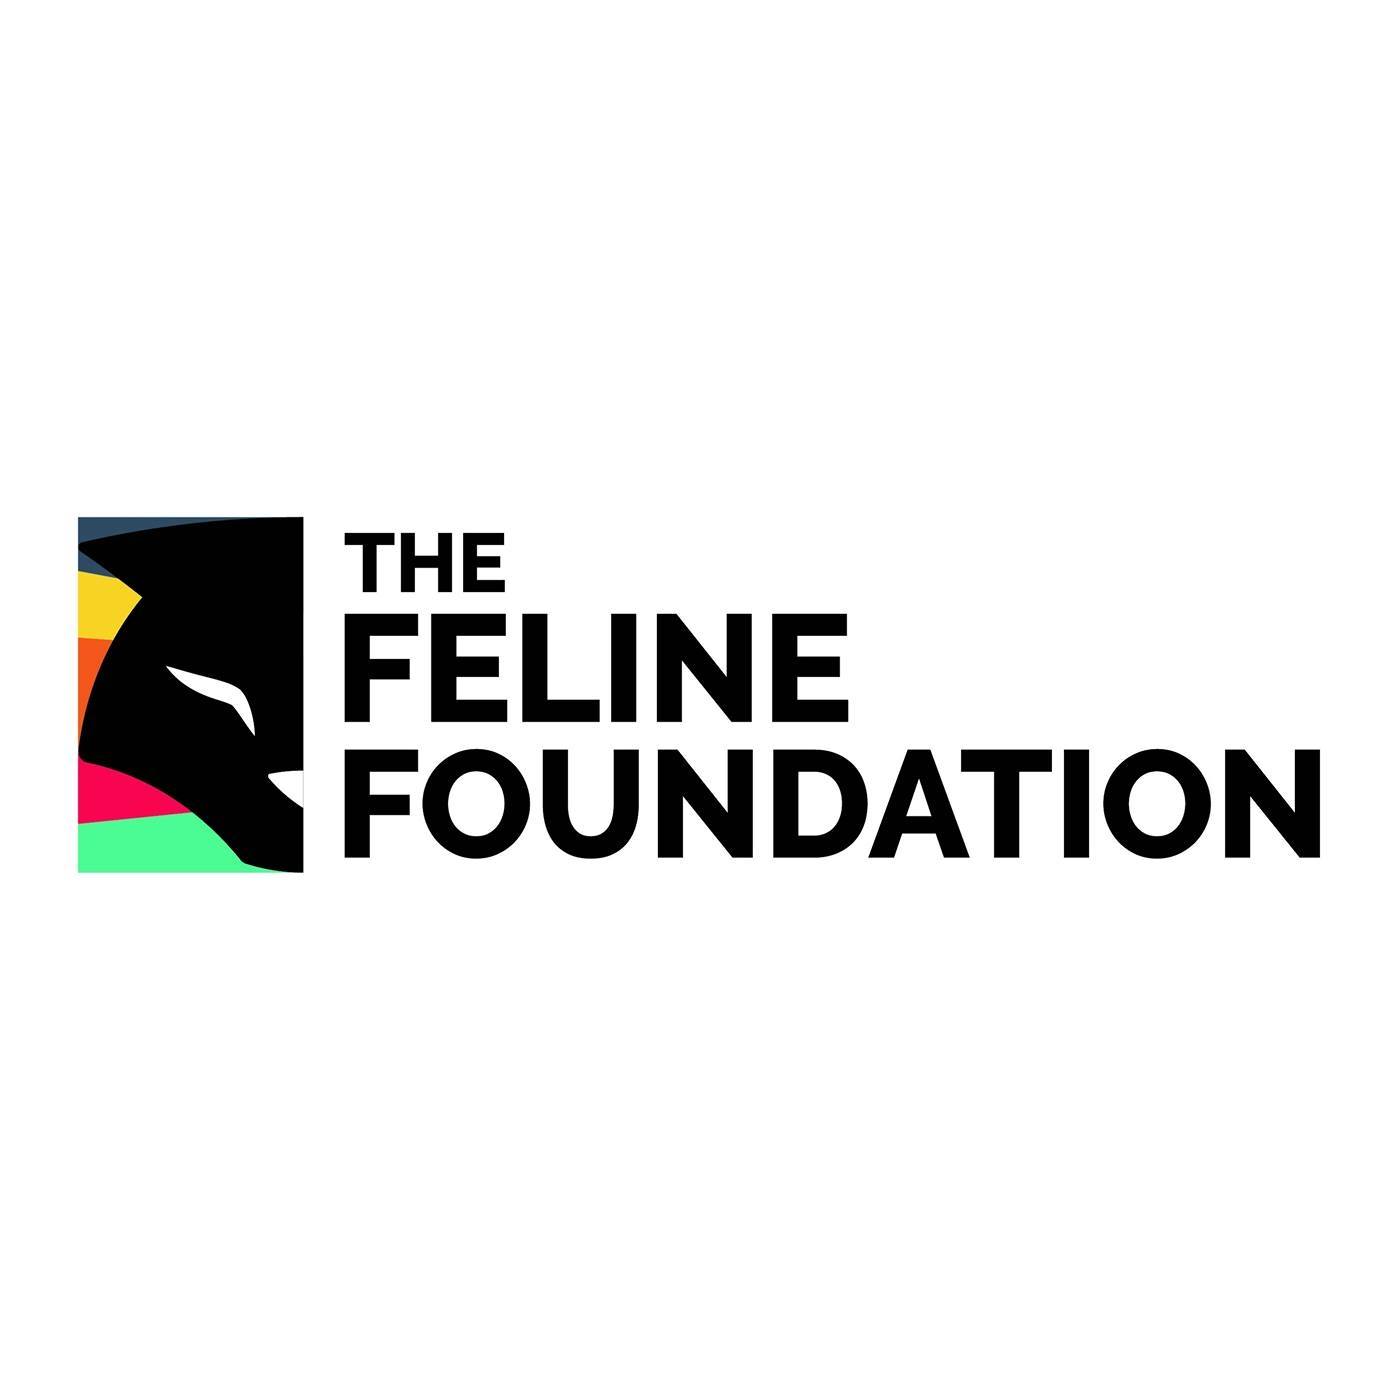 The Feline Foundation Community Veterinary Clinic and Pet Store|Hospitals|Medical Services